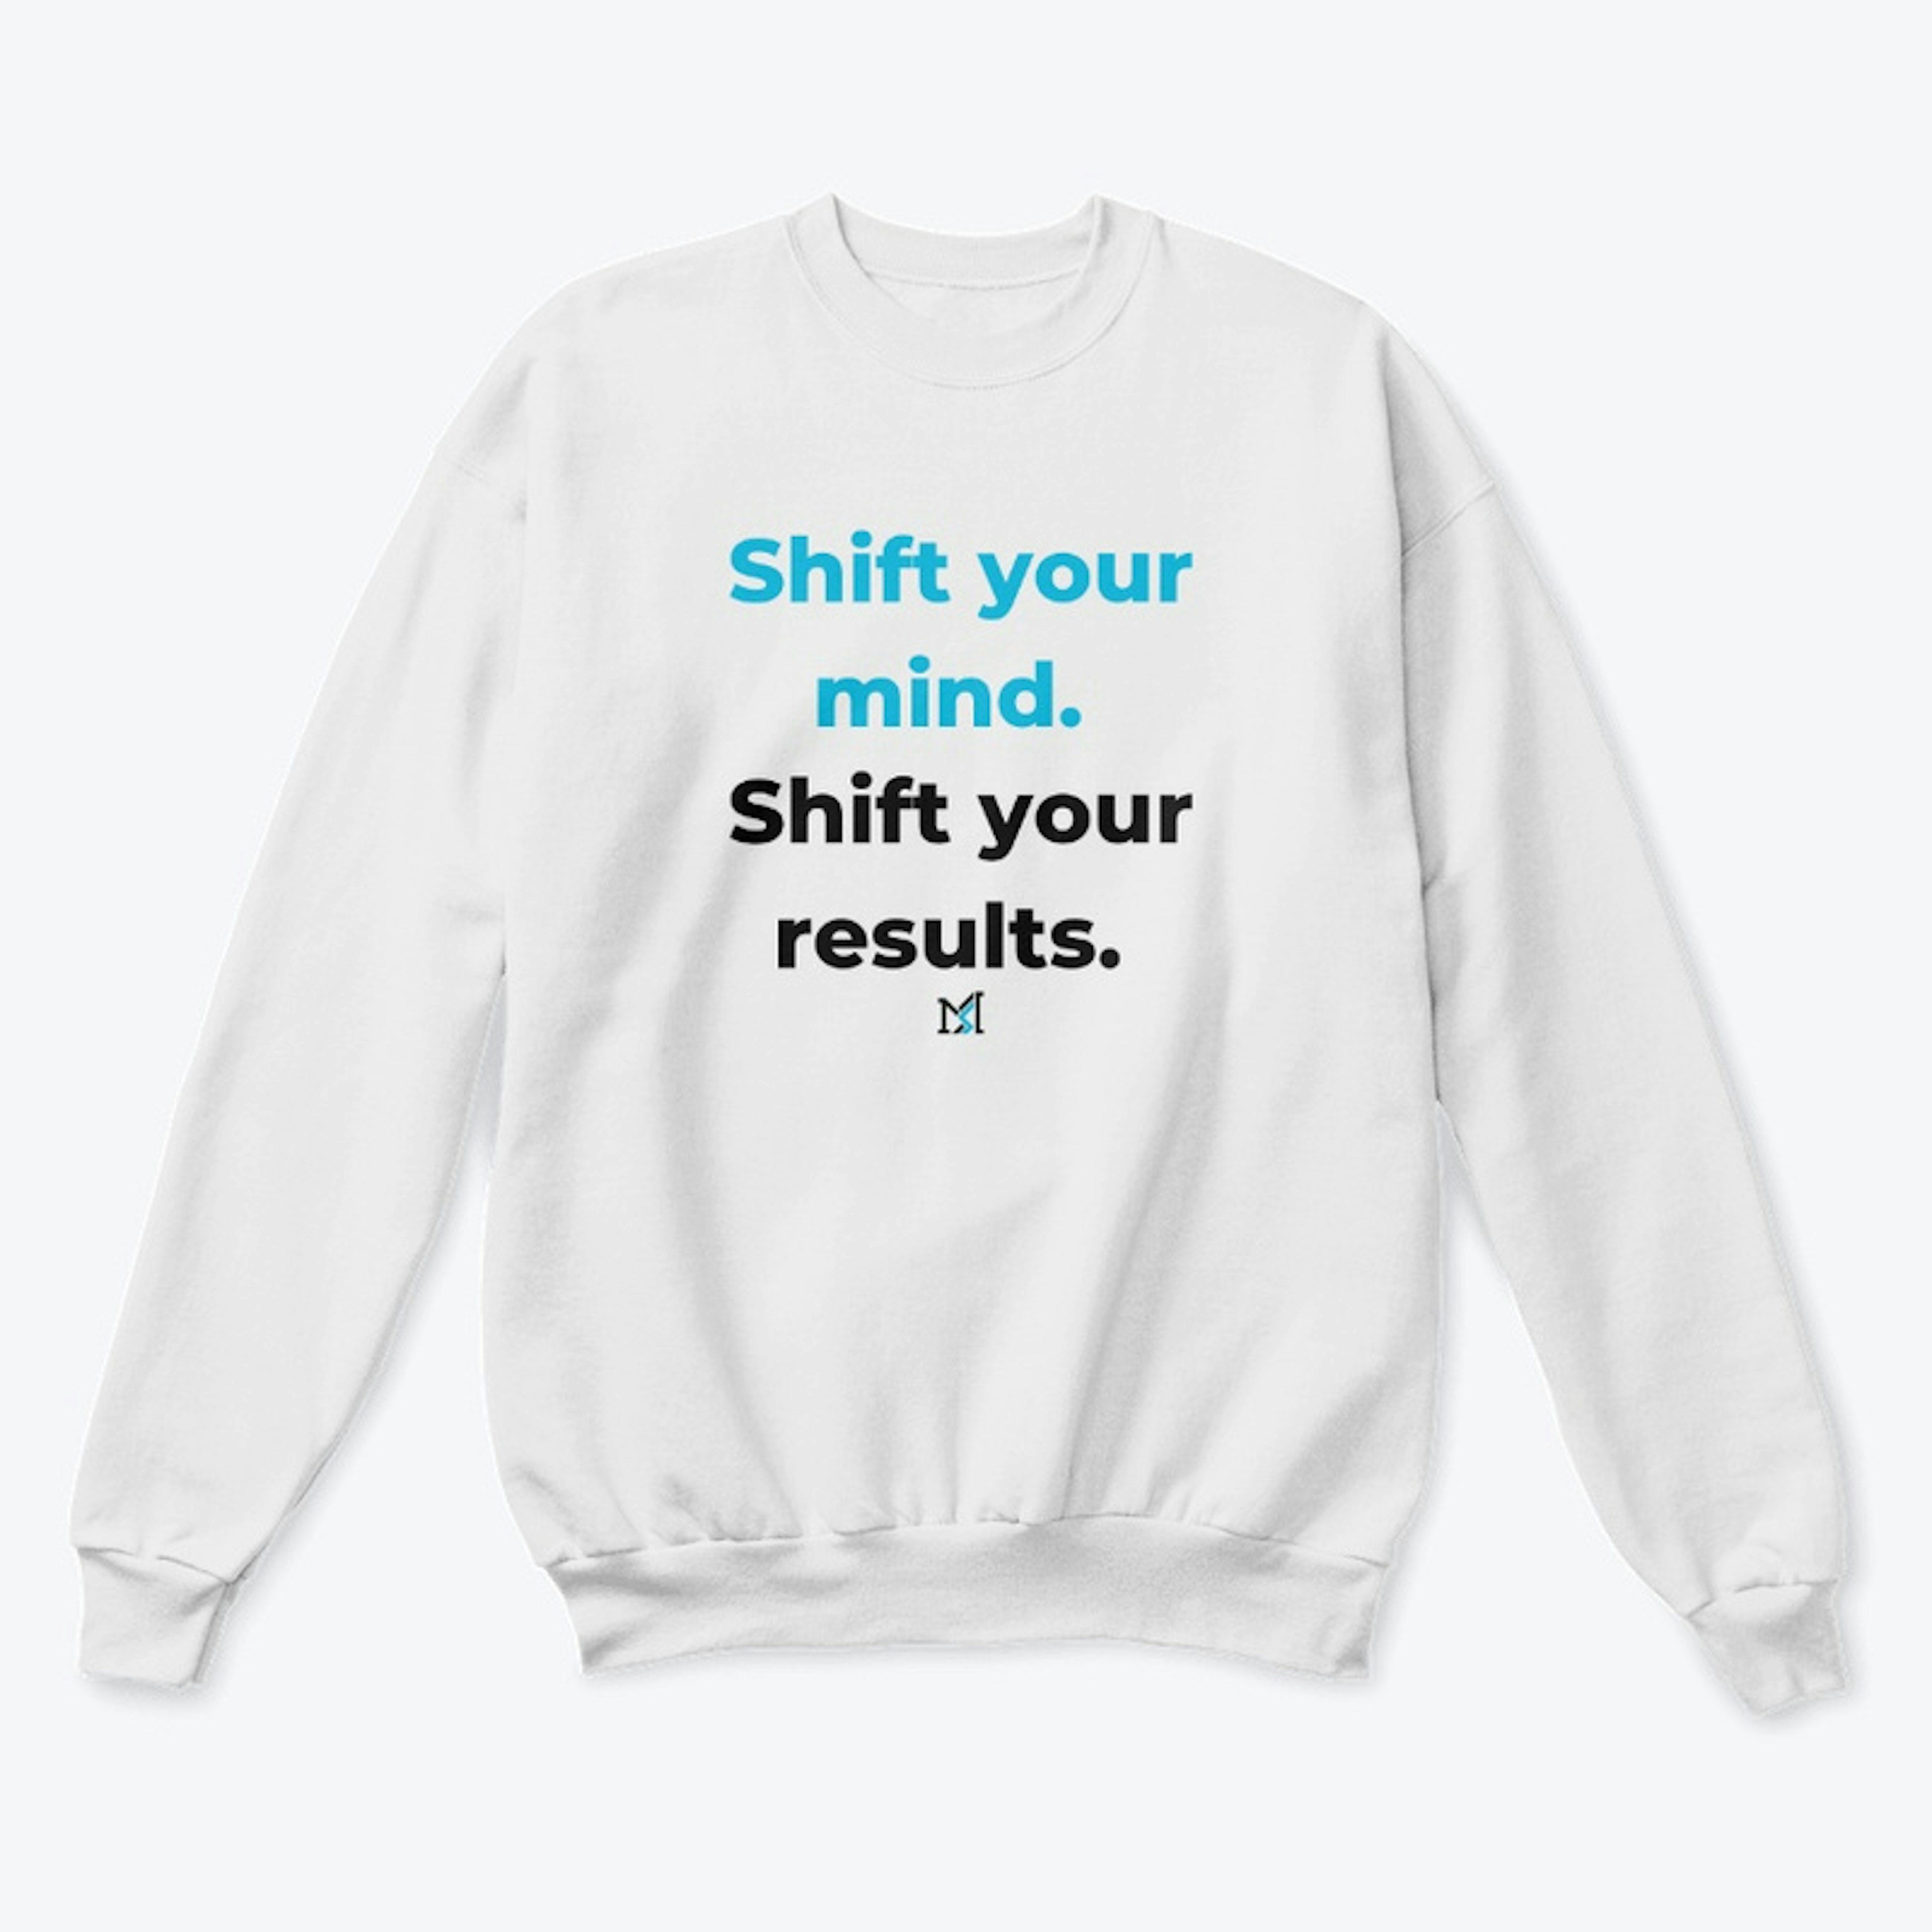 Shift your mind- White hoodie 